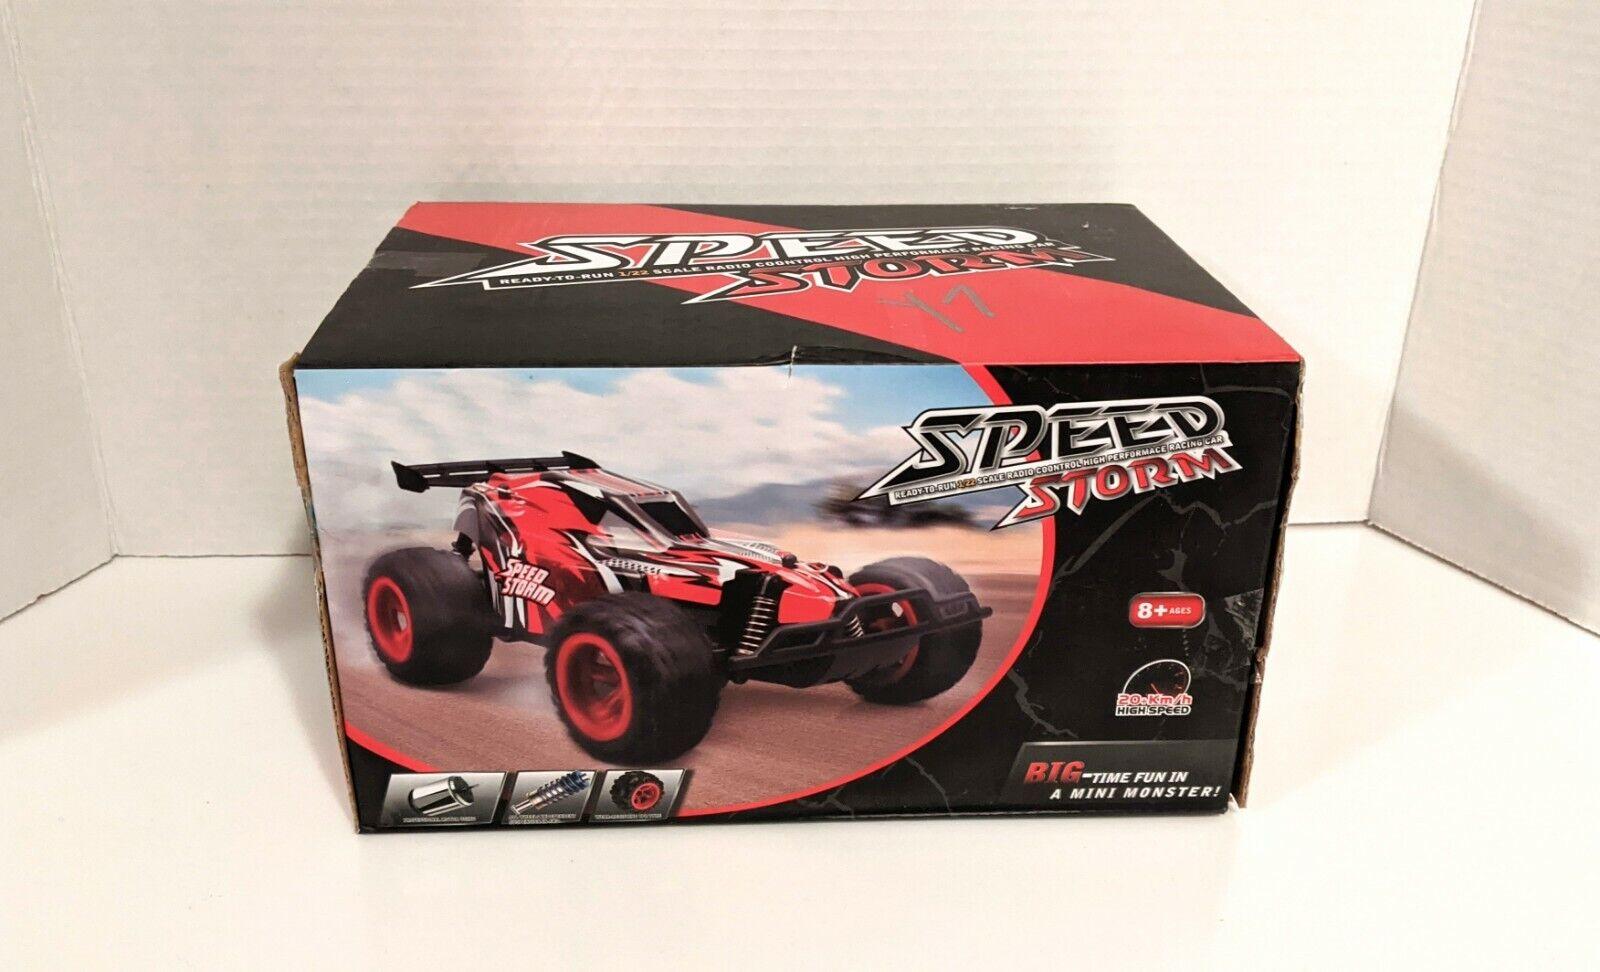 High Speed Storm Remote Control Car: Built to Last: The High-Speed Storm Remote Control Car.